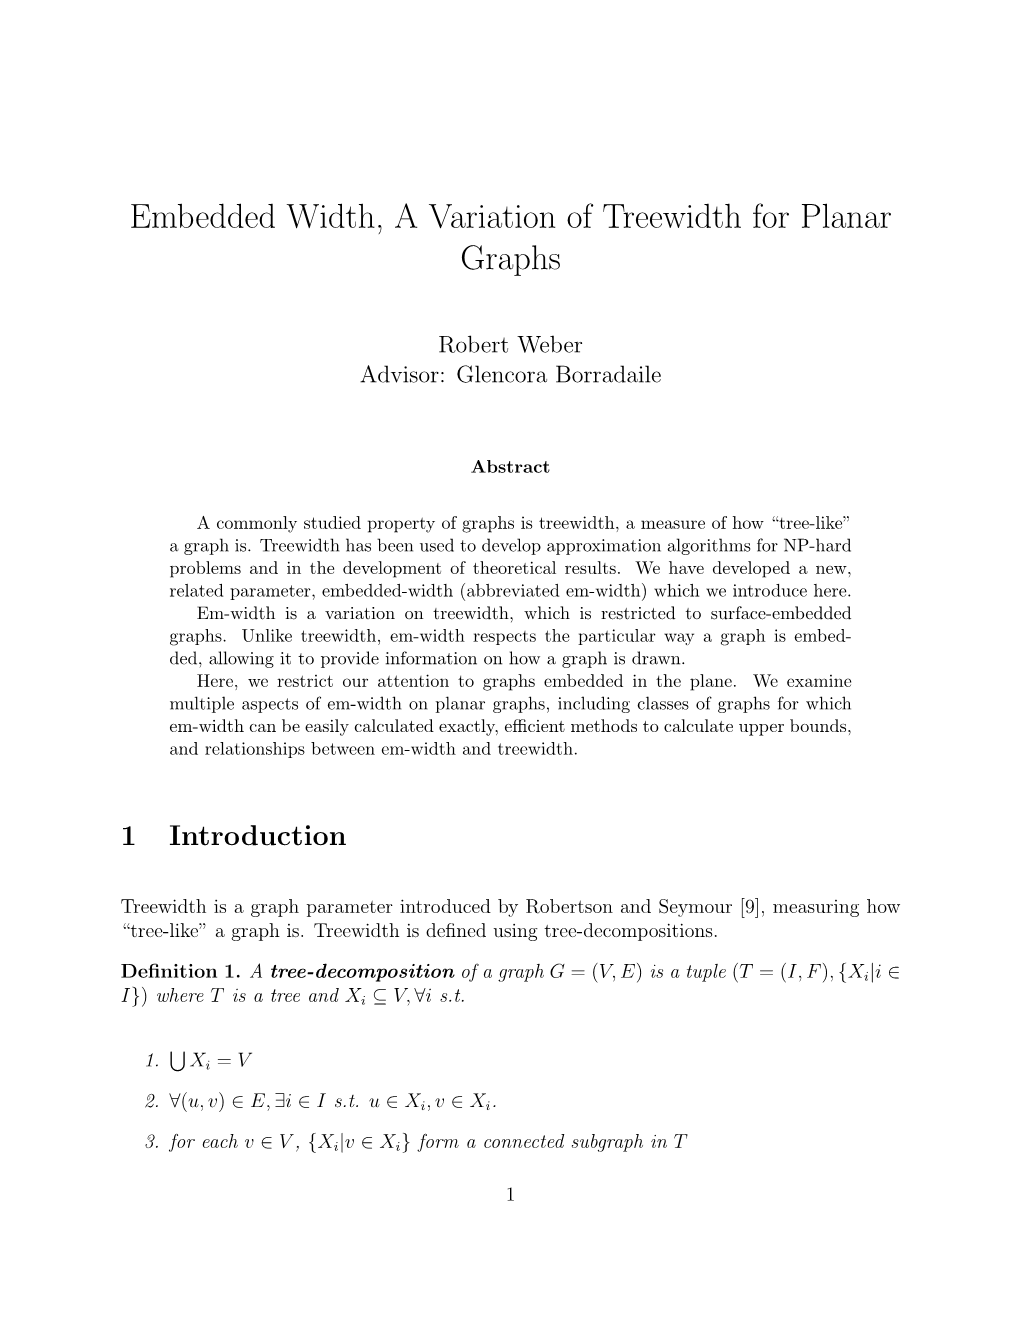 Embedded Width, a Variation of Treewidth for Planar Graphs